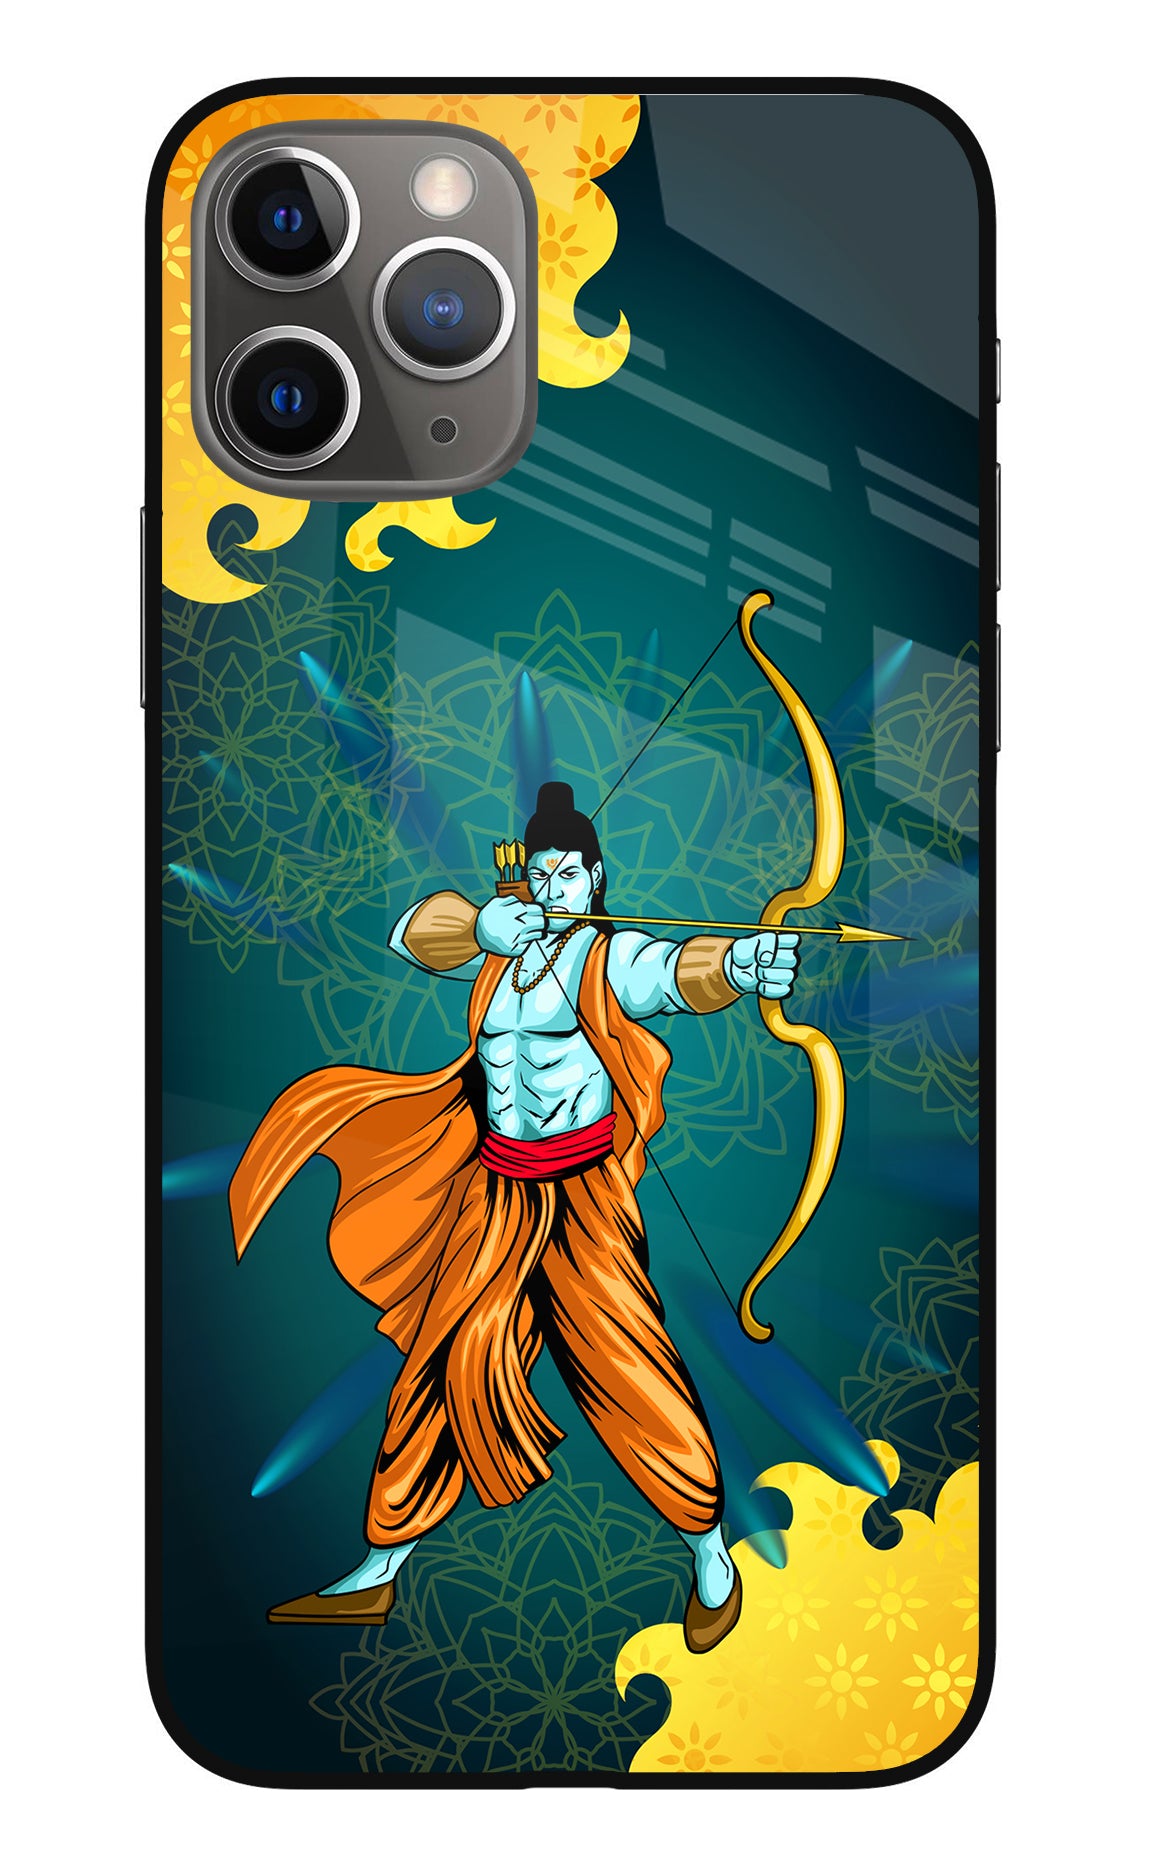 Lord Ram - 6 iPhone 11 Pro Back Cover